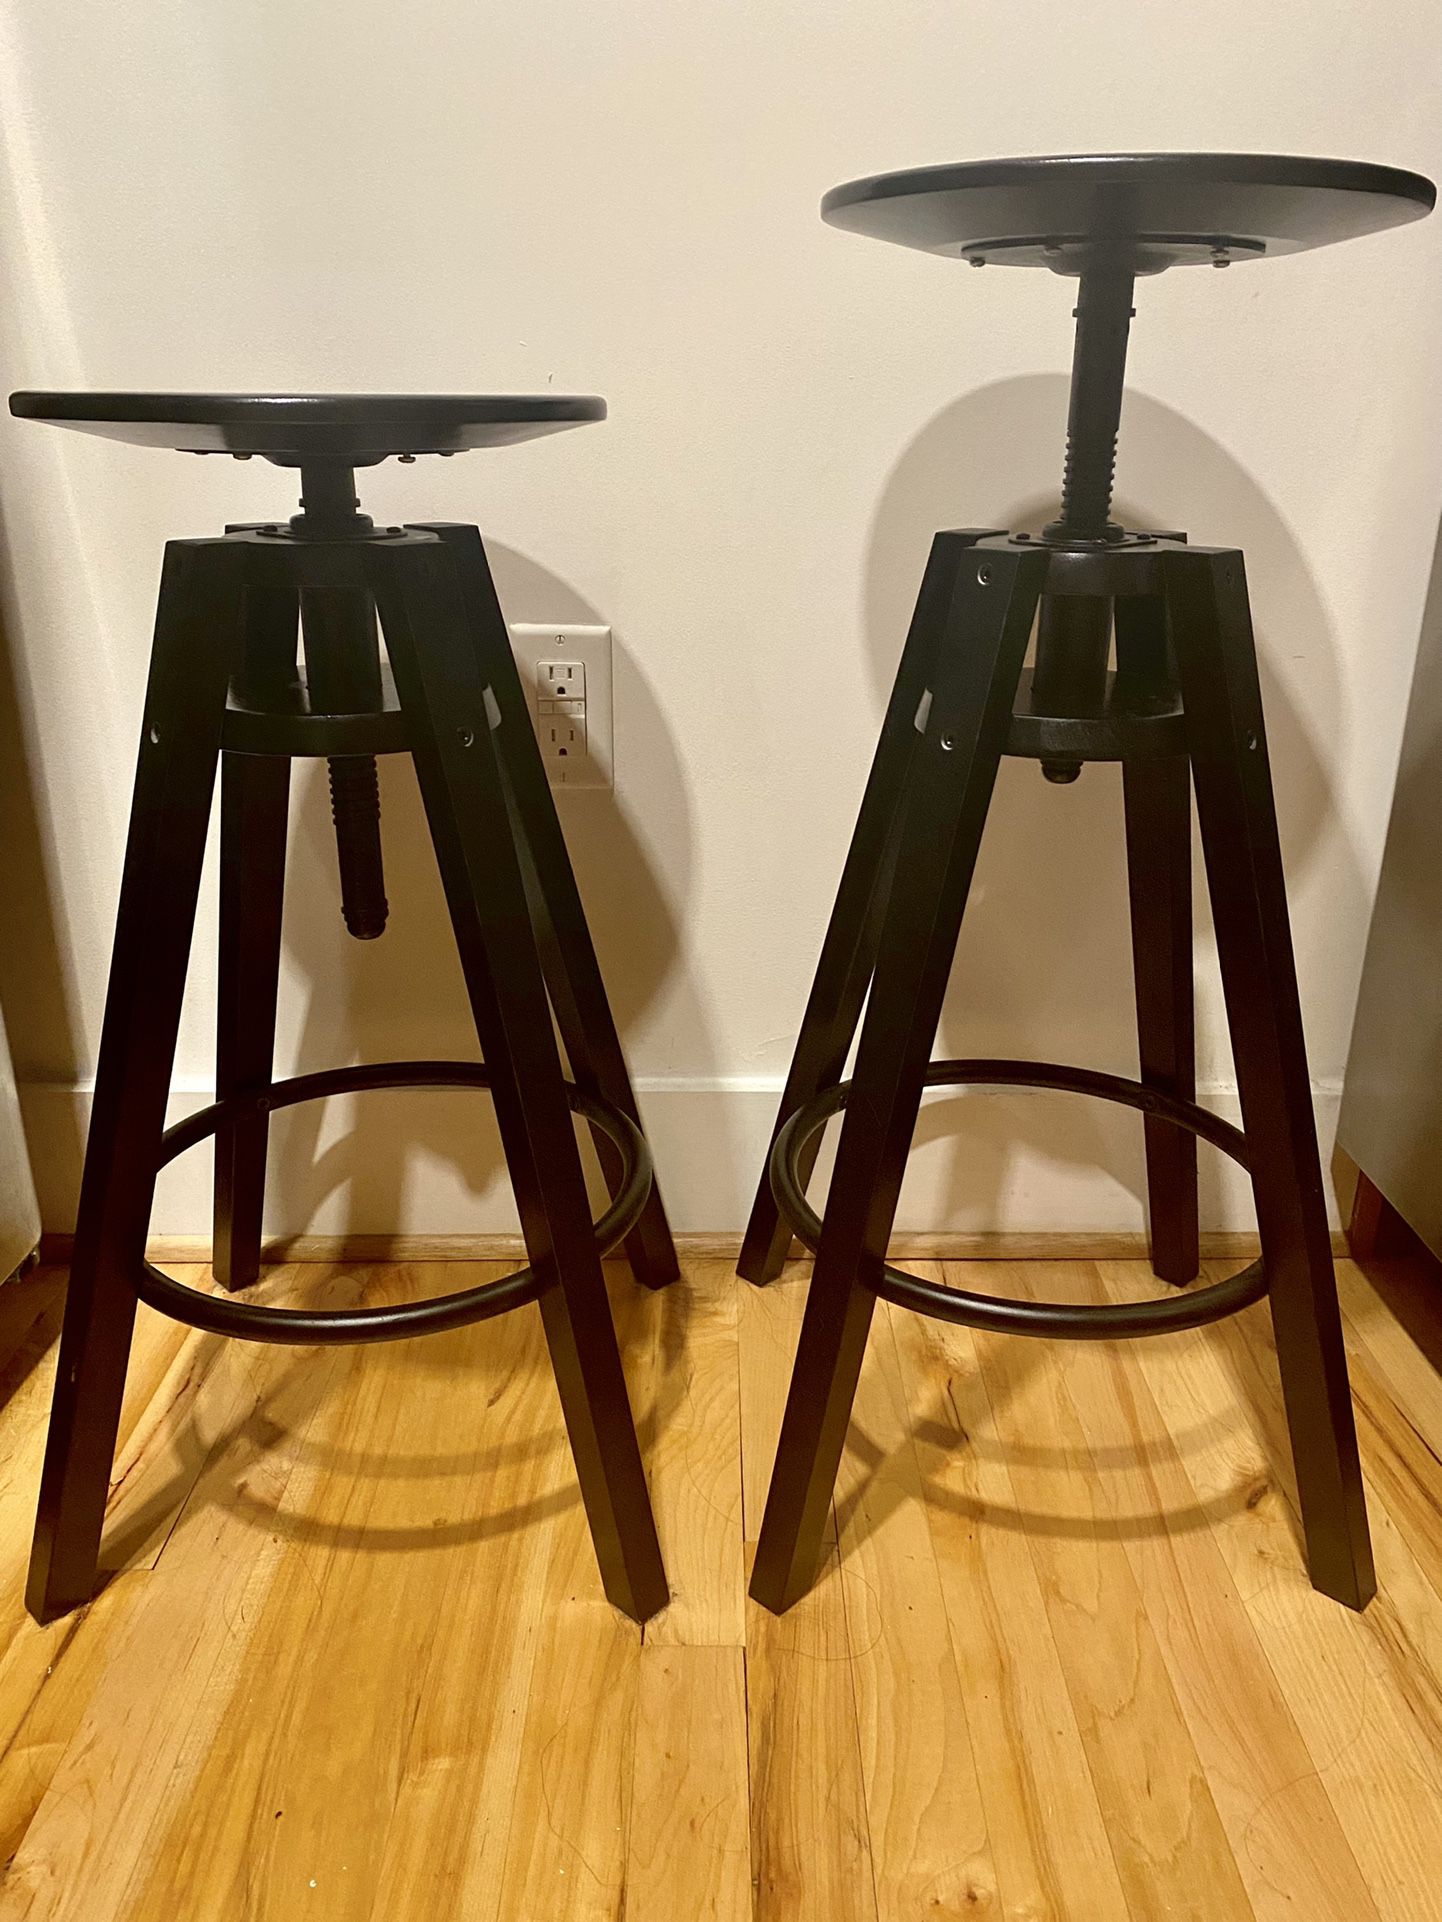 Two IKEA- Dalfred bar stools